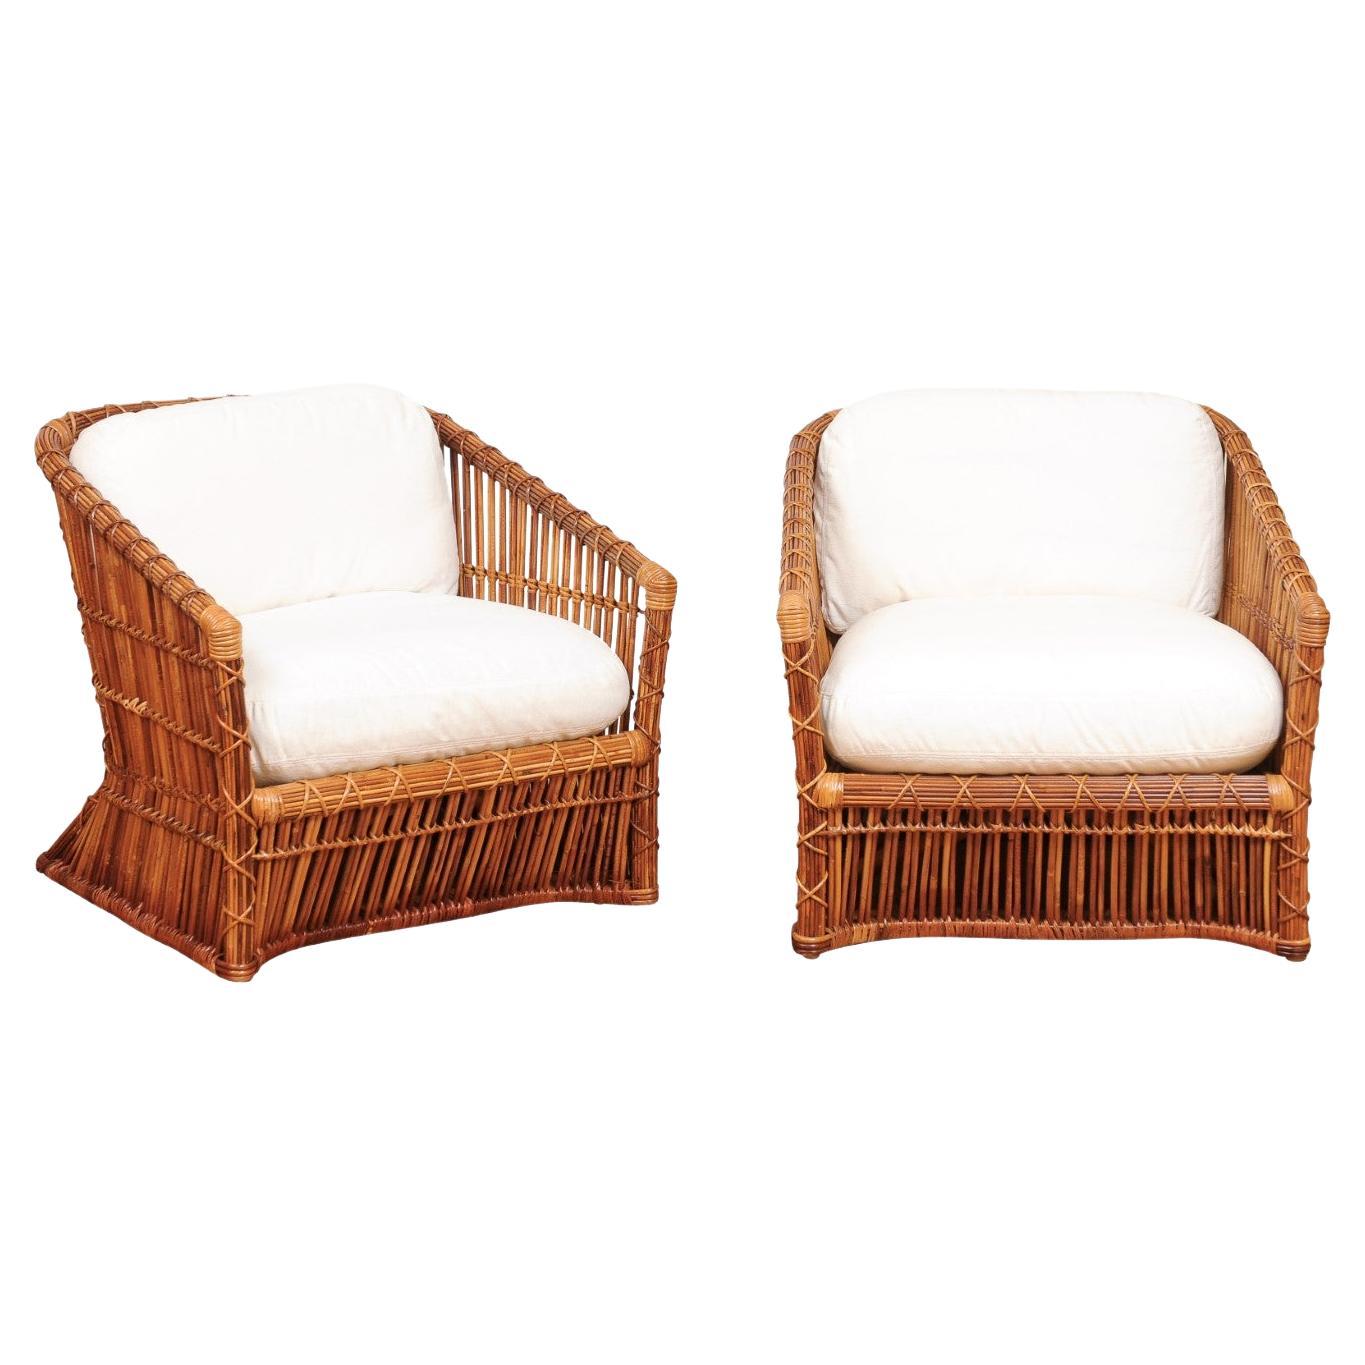 Exceptional Pair of Rattan and Cane Basket Loungers by McGuire, Circa 1975 For Sale